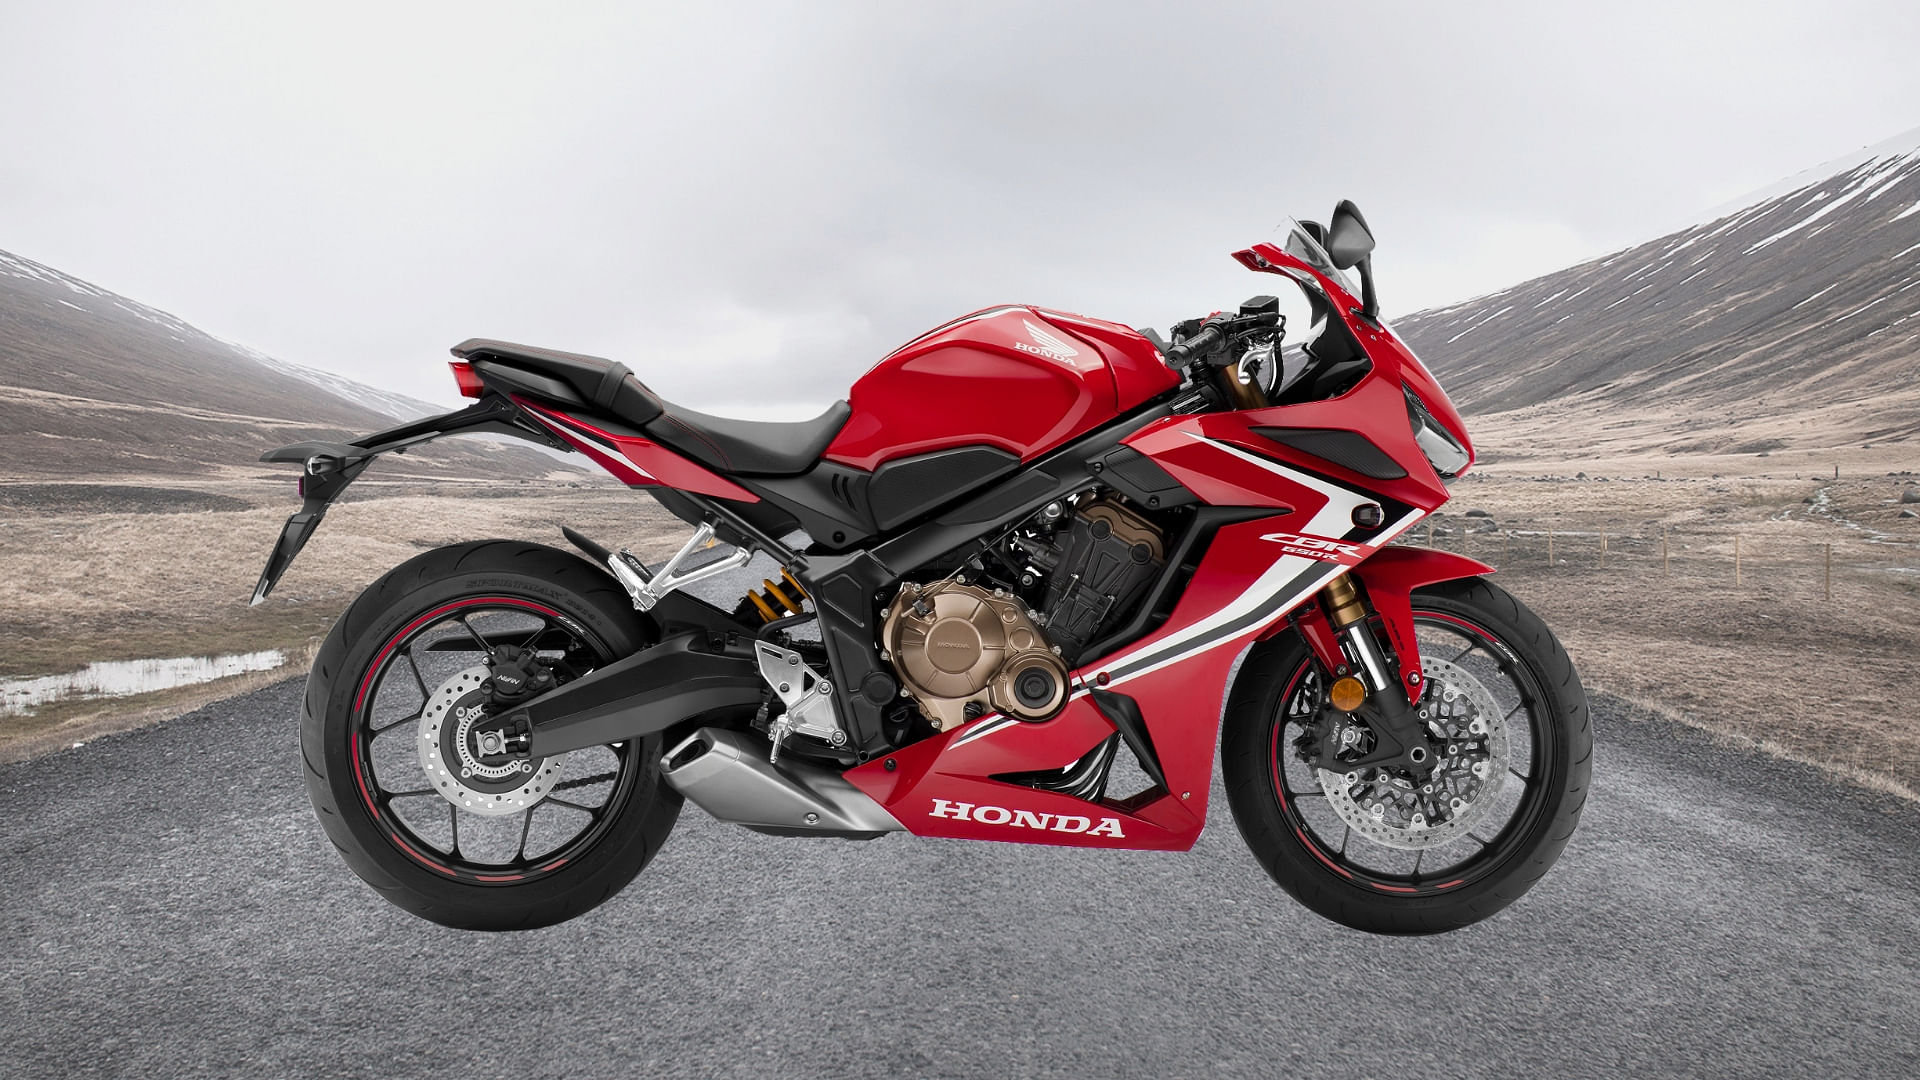 The Honda CBR 650R has been launched in India.&nbsp;